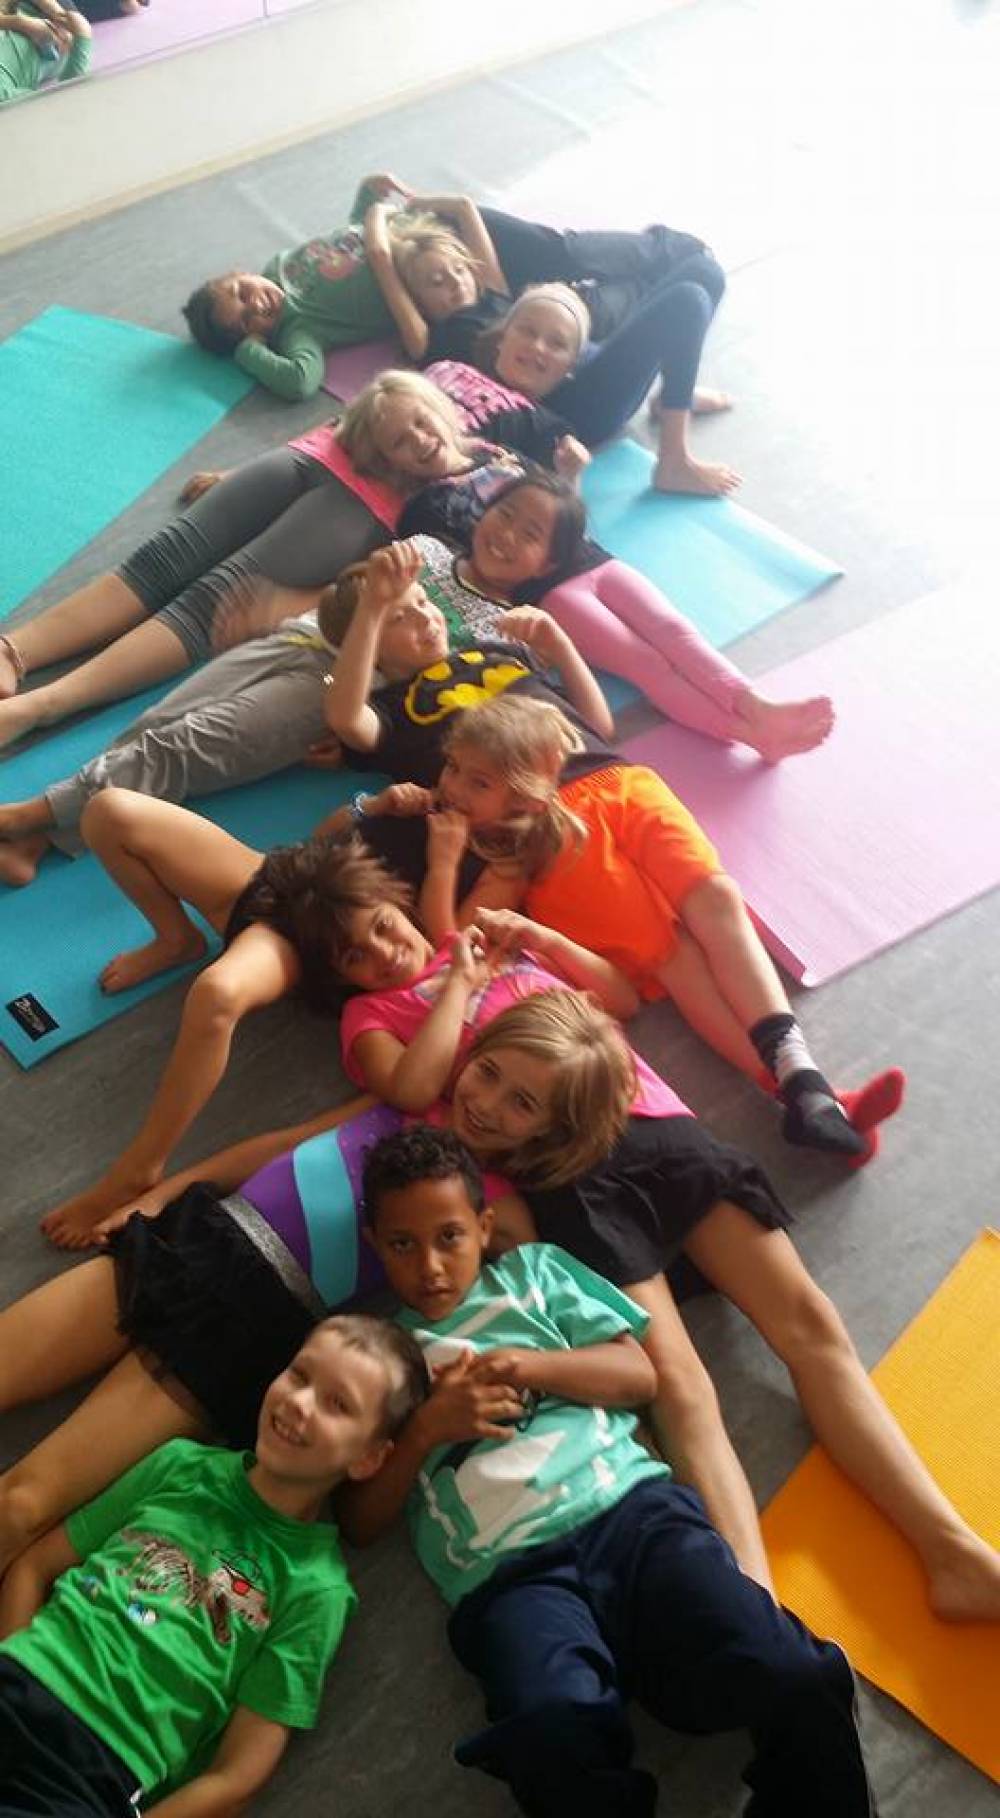 TOP MINNESOTA SPORTS CAMP: Camp JUST DANCE at Dance-N-Magic is a Top Sports Summer Camp located in St. Paul Minnesota offering many fun and enriching Sports and other camp programs. 